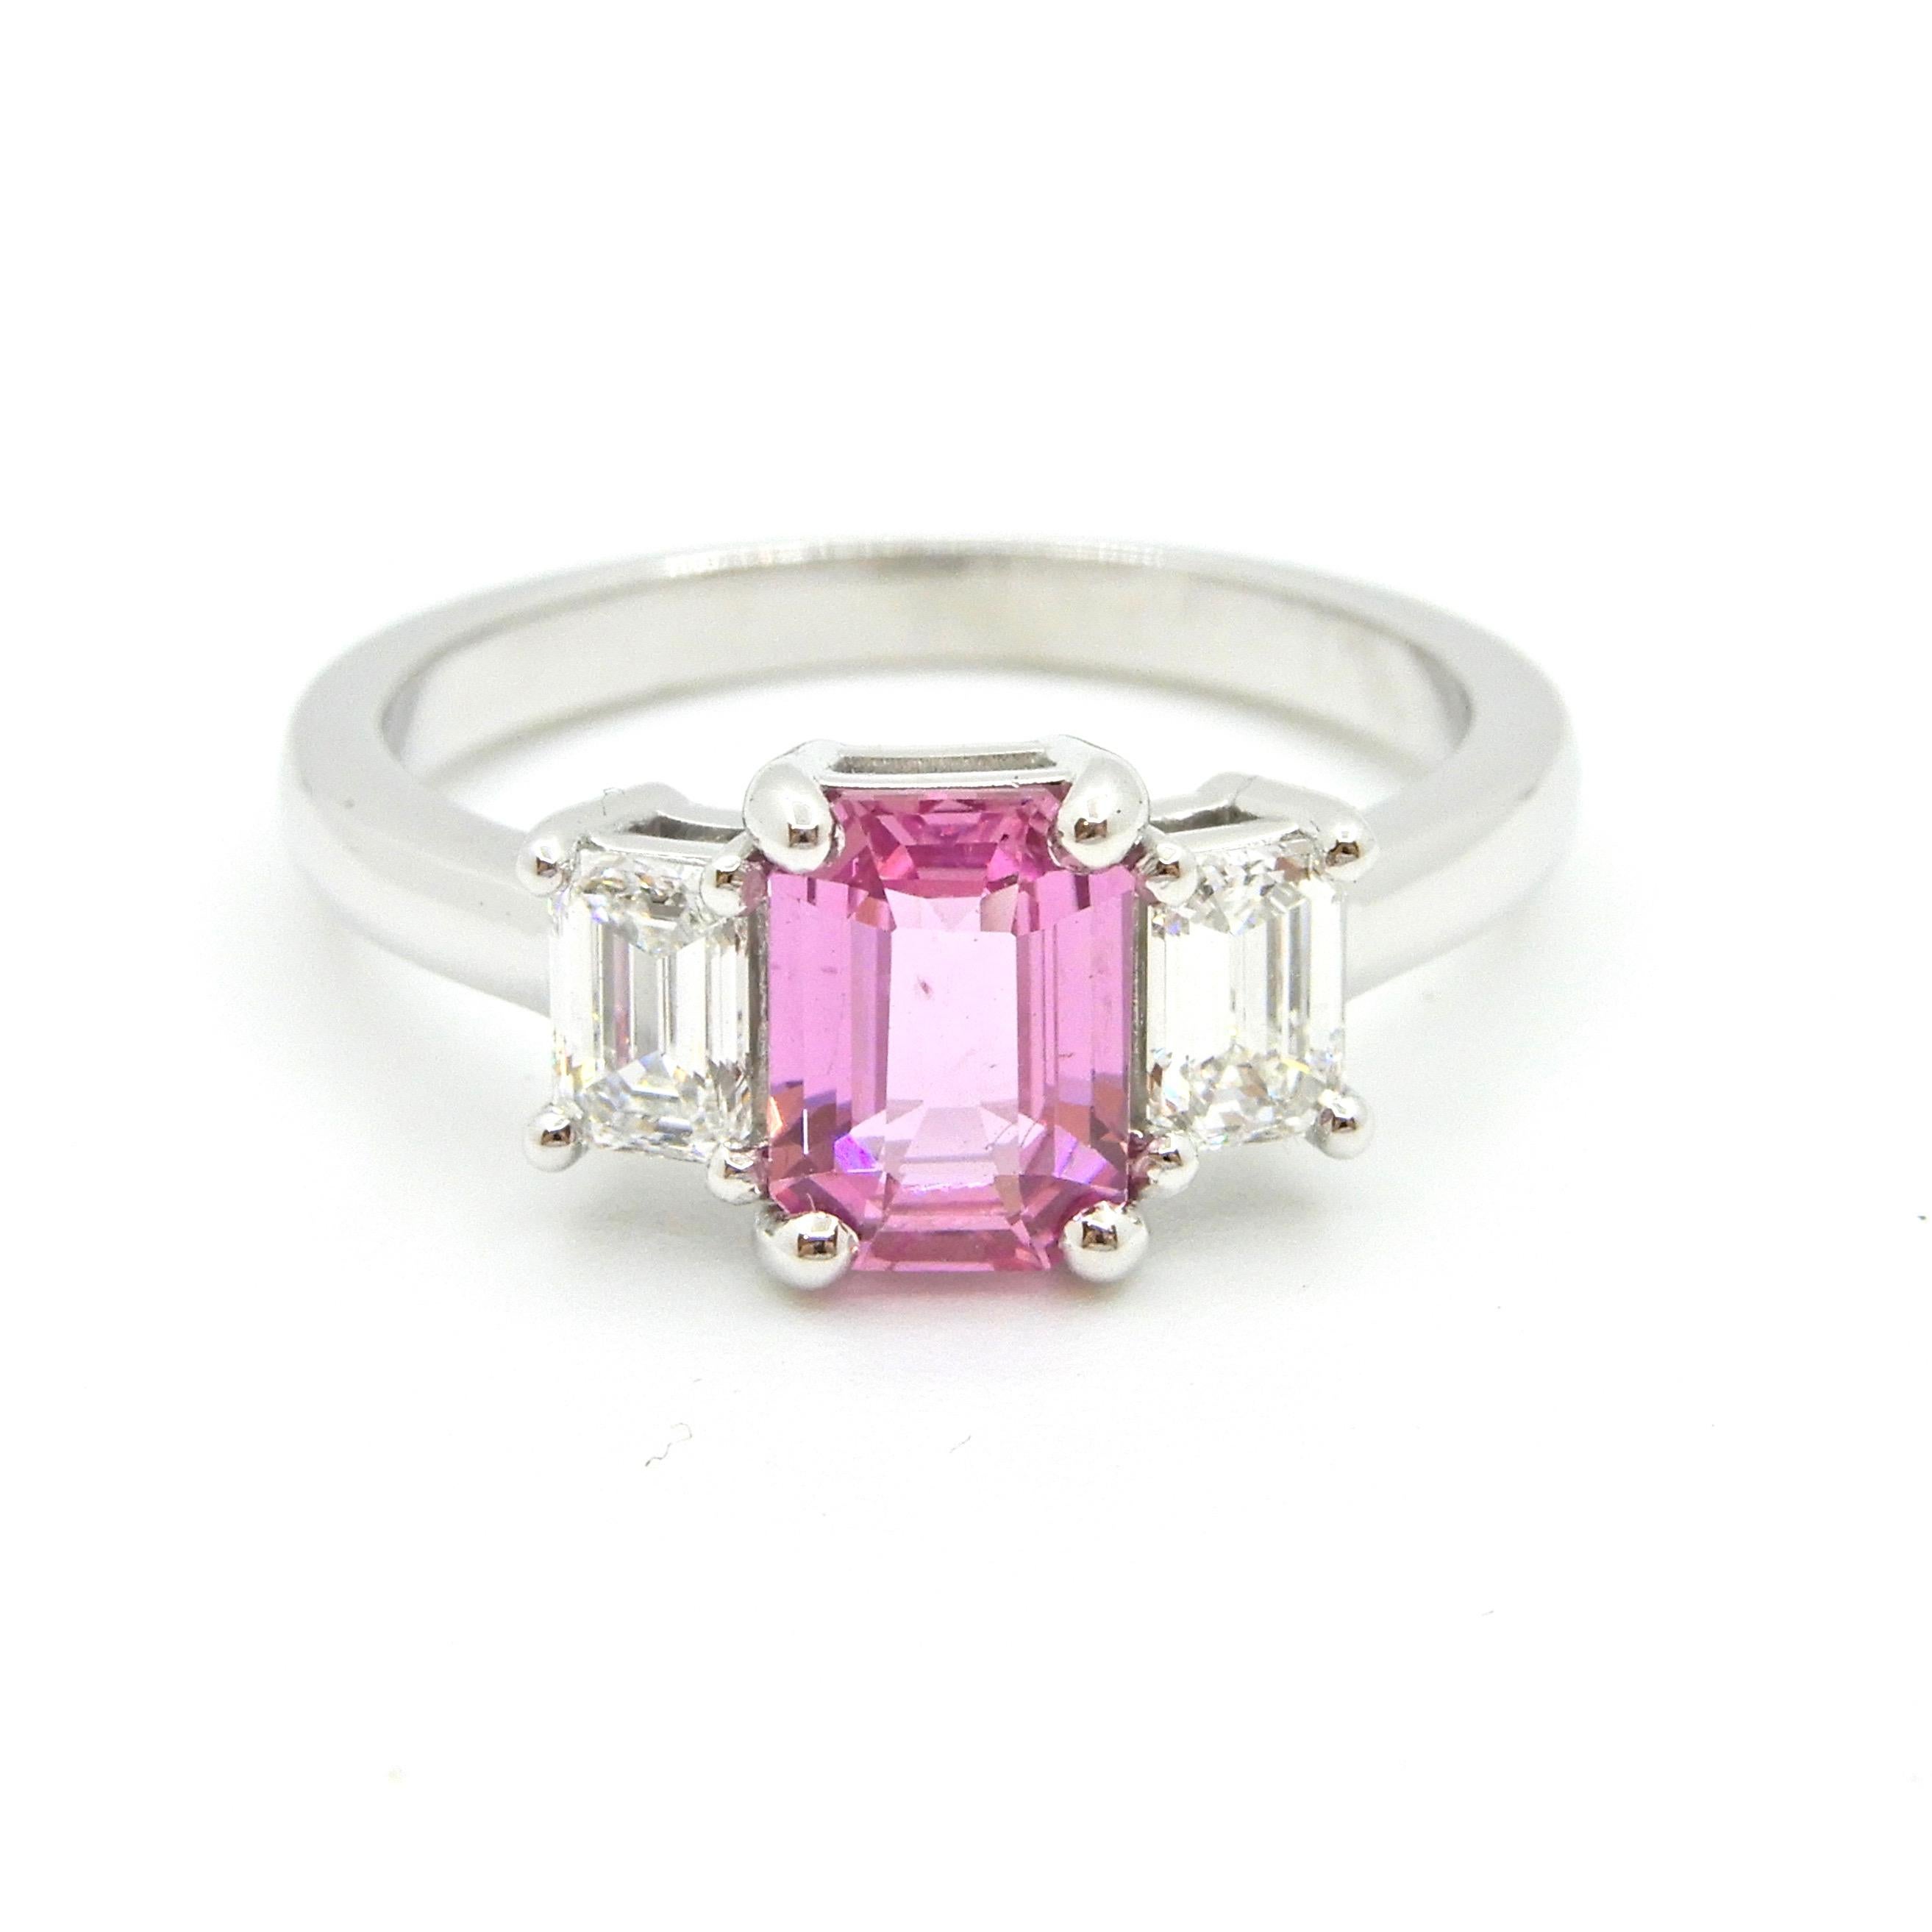 This 1.21 Carat Emerald Cut Pink Sapphire and Diamond Engagement Ring is set in 18 carat white gold. The rounded band flows up to support a central 4 claw mount holding an emerald cut natural, no heat pink sapphire with 4 claw set emerald cut